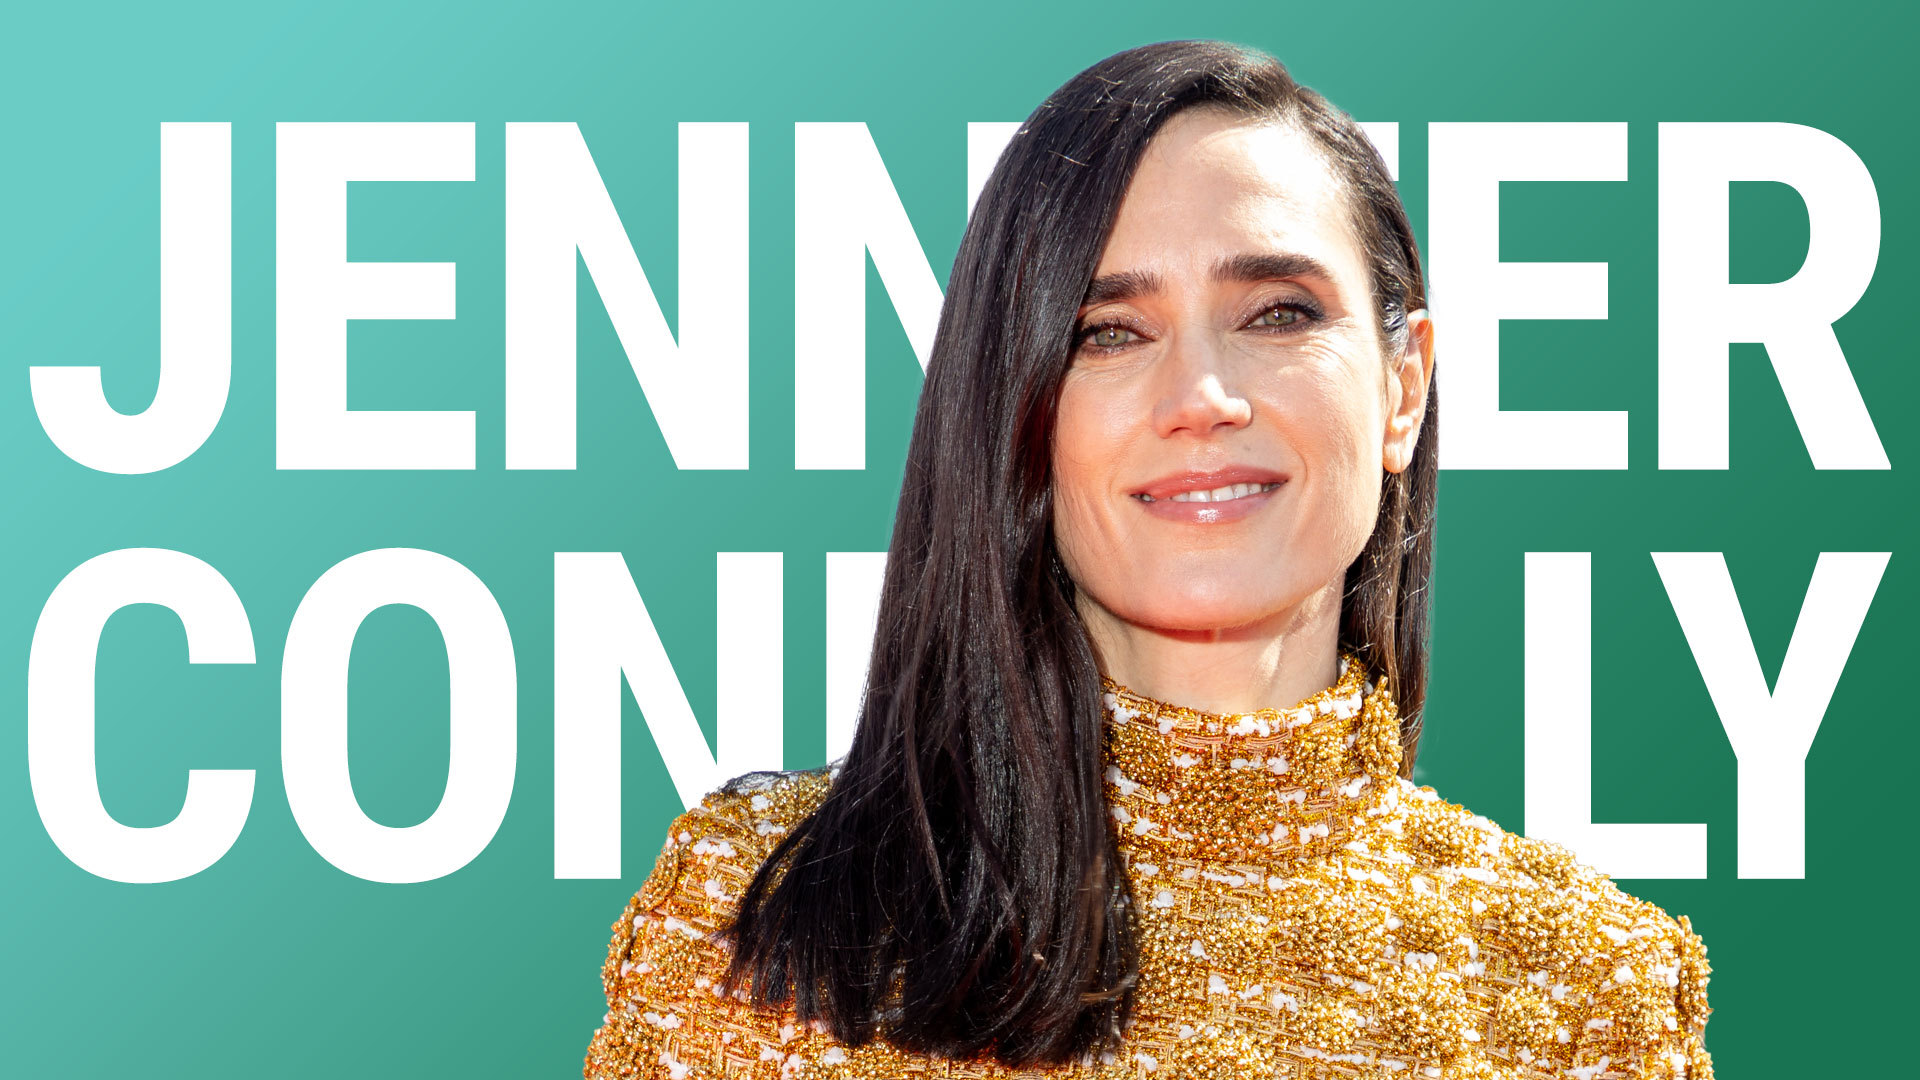 aisha snider recommends jennifer connelly shelter facial pic